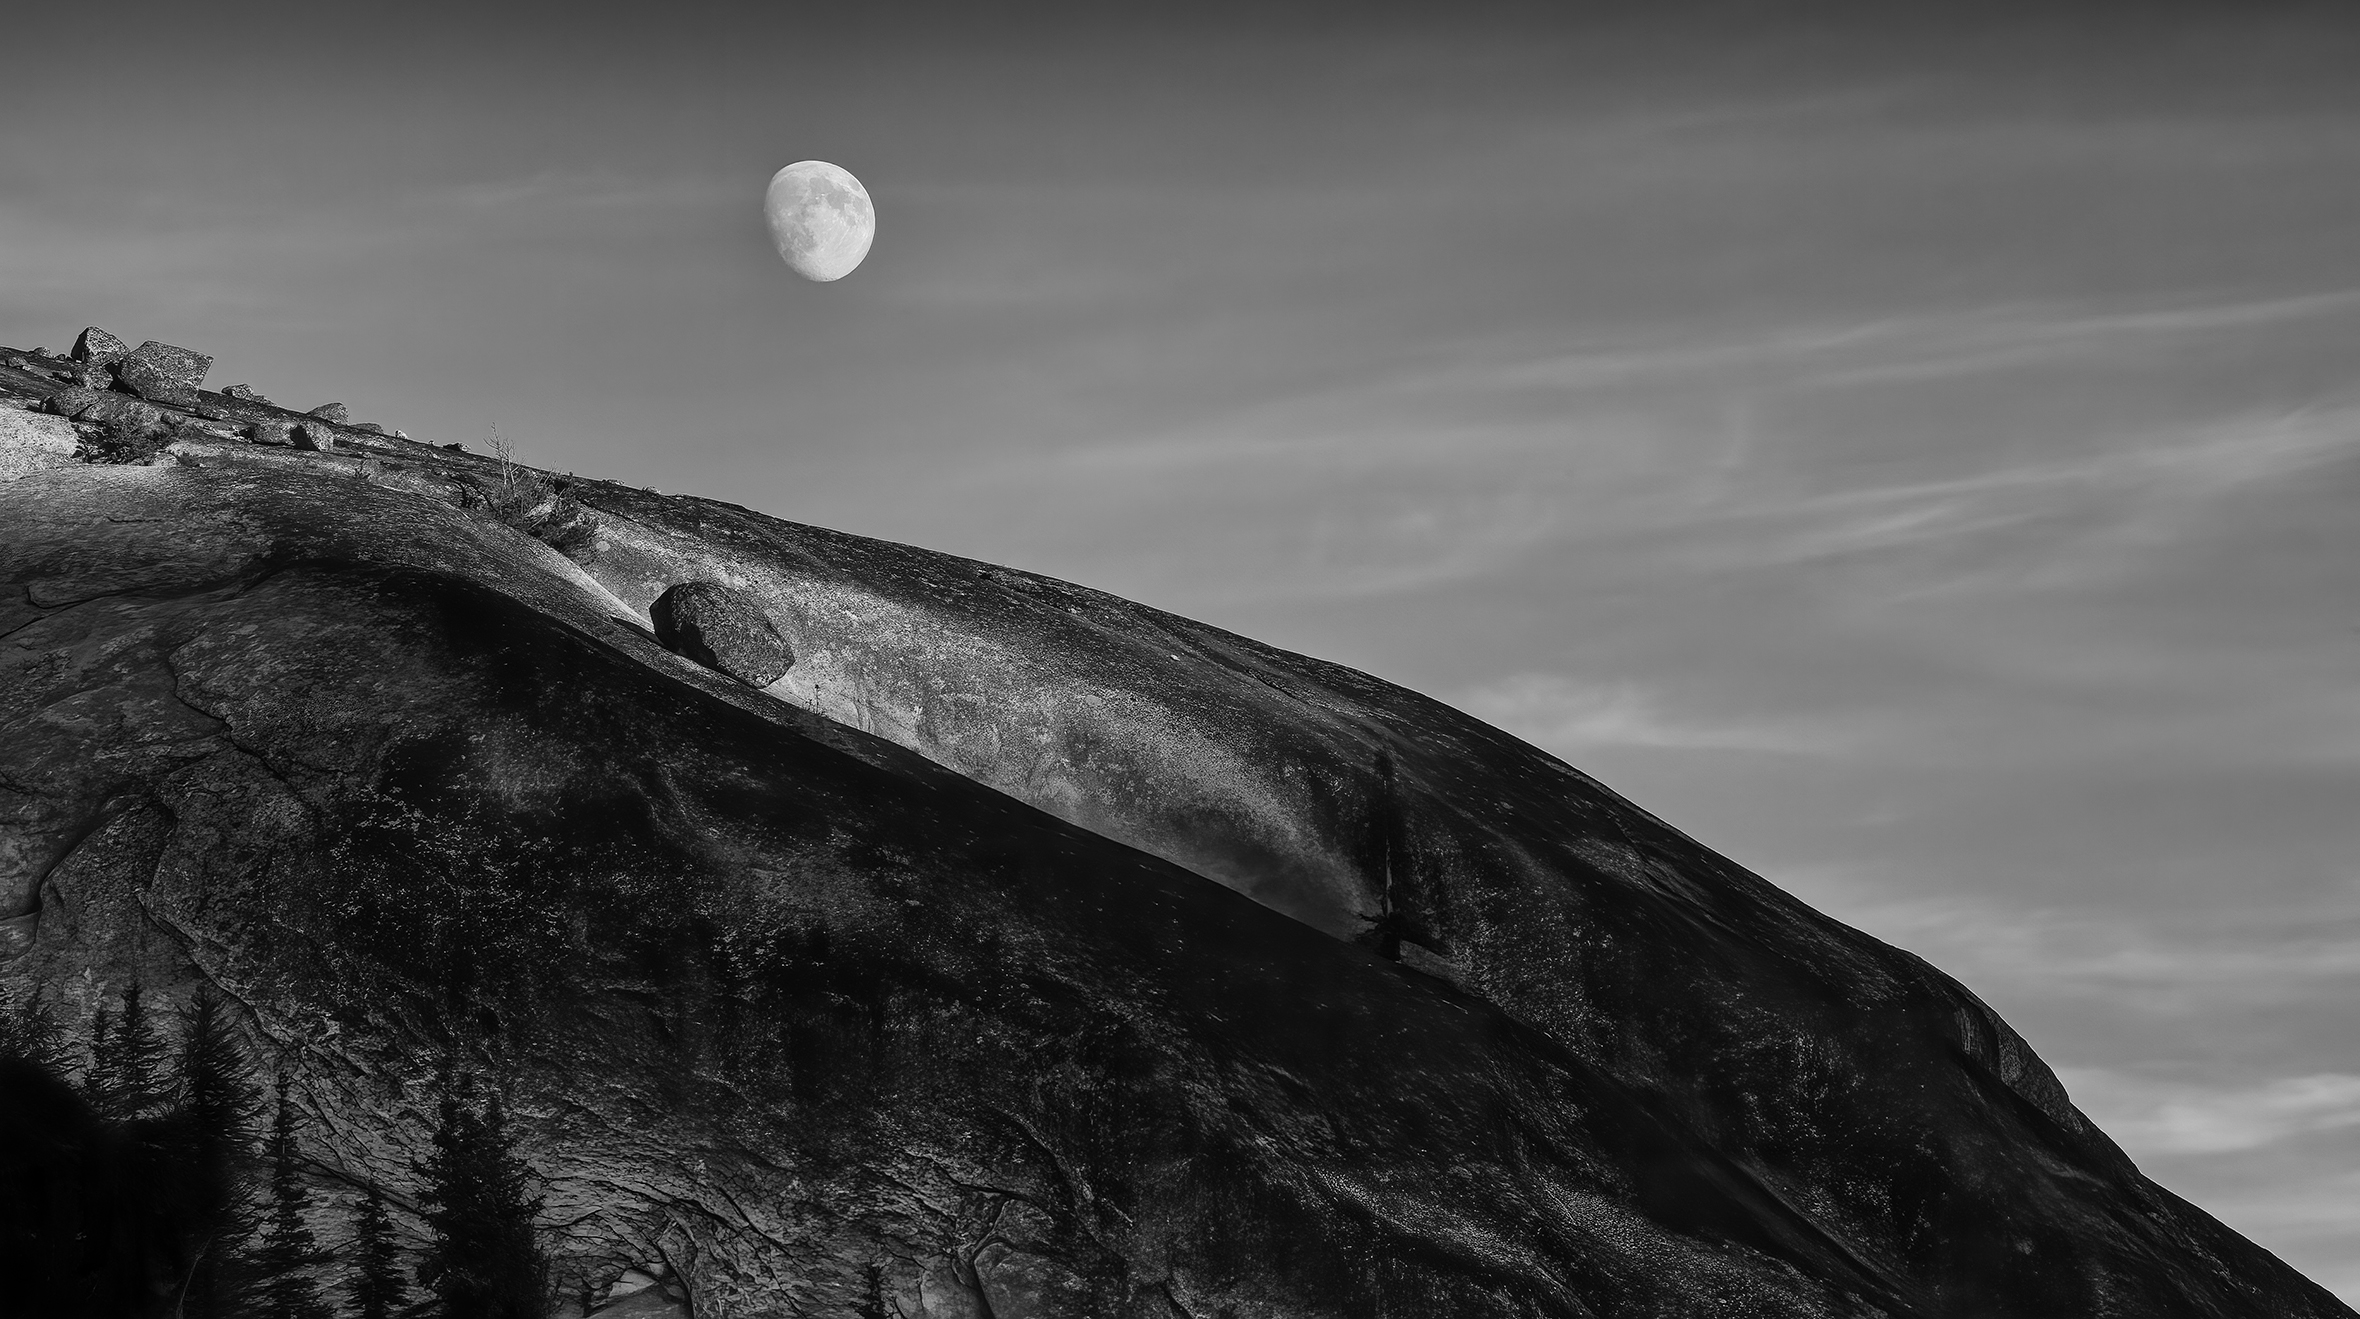 Moon above a bare and rocky mountaintop.